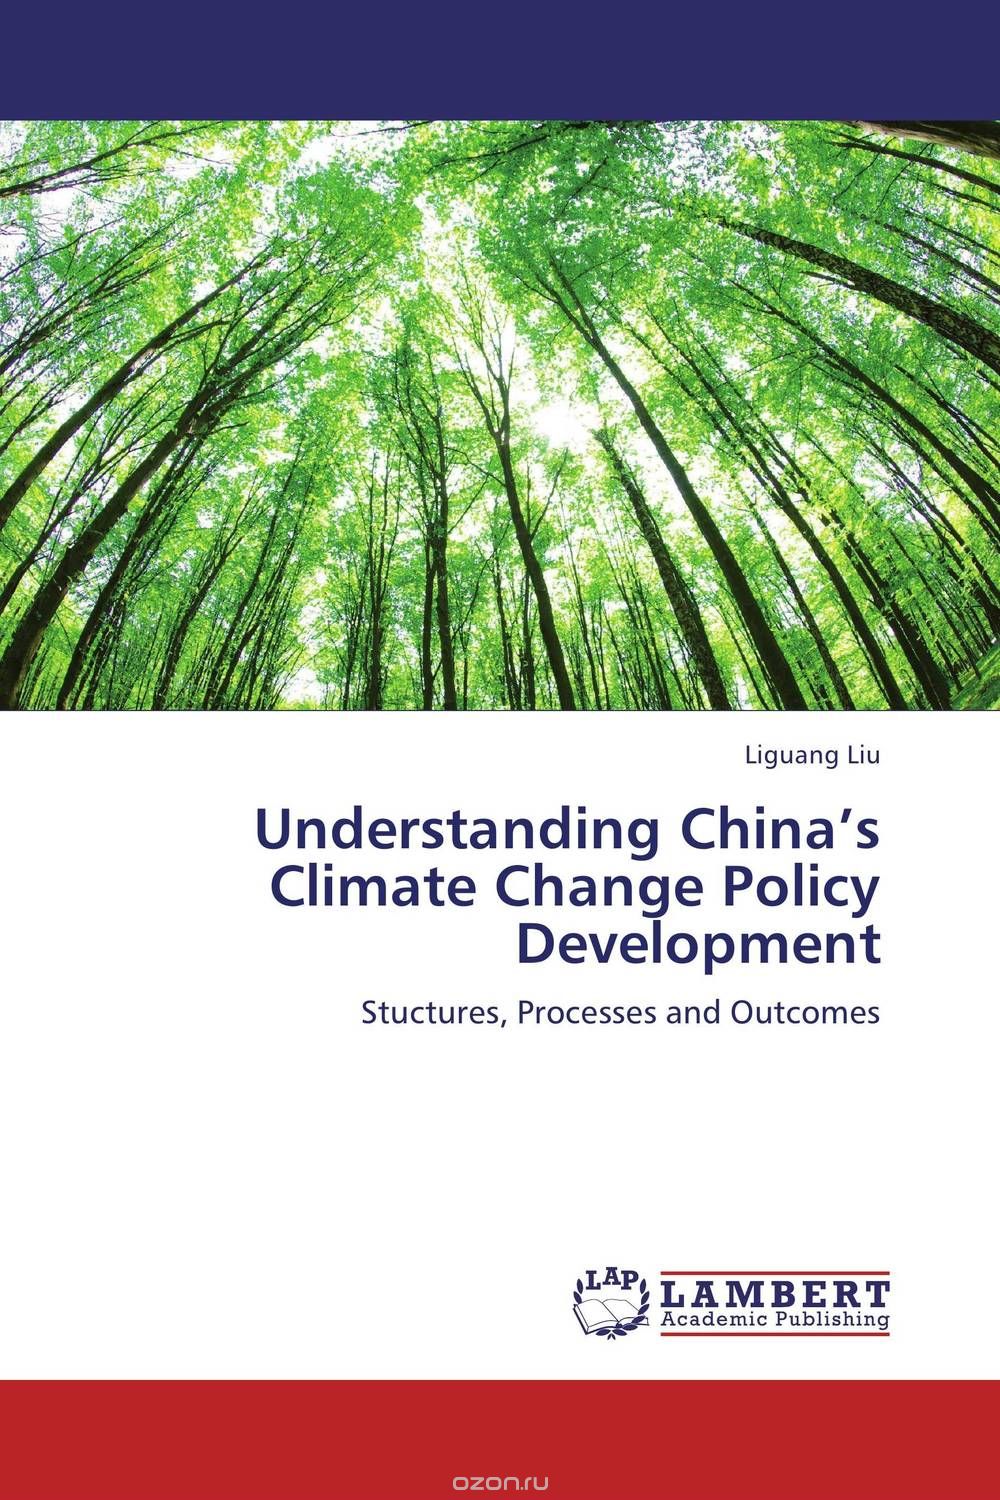 Understanding China’s Climate Change Policy Development